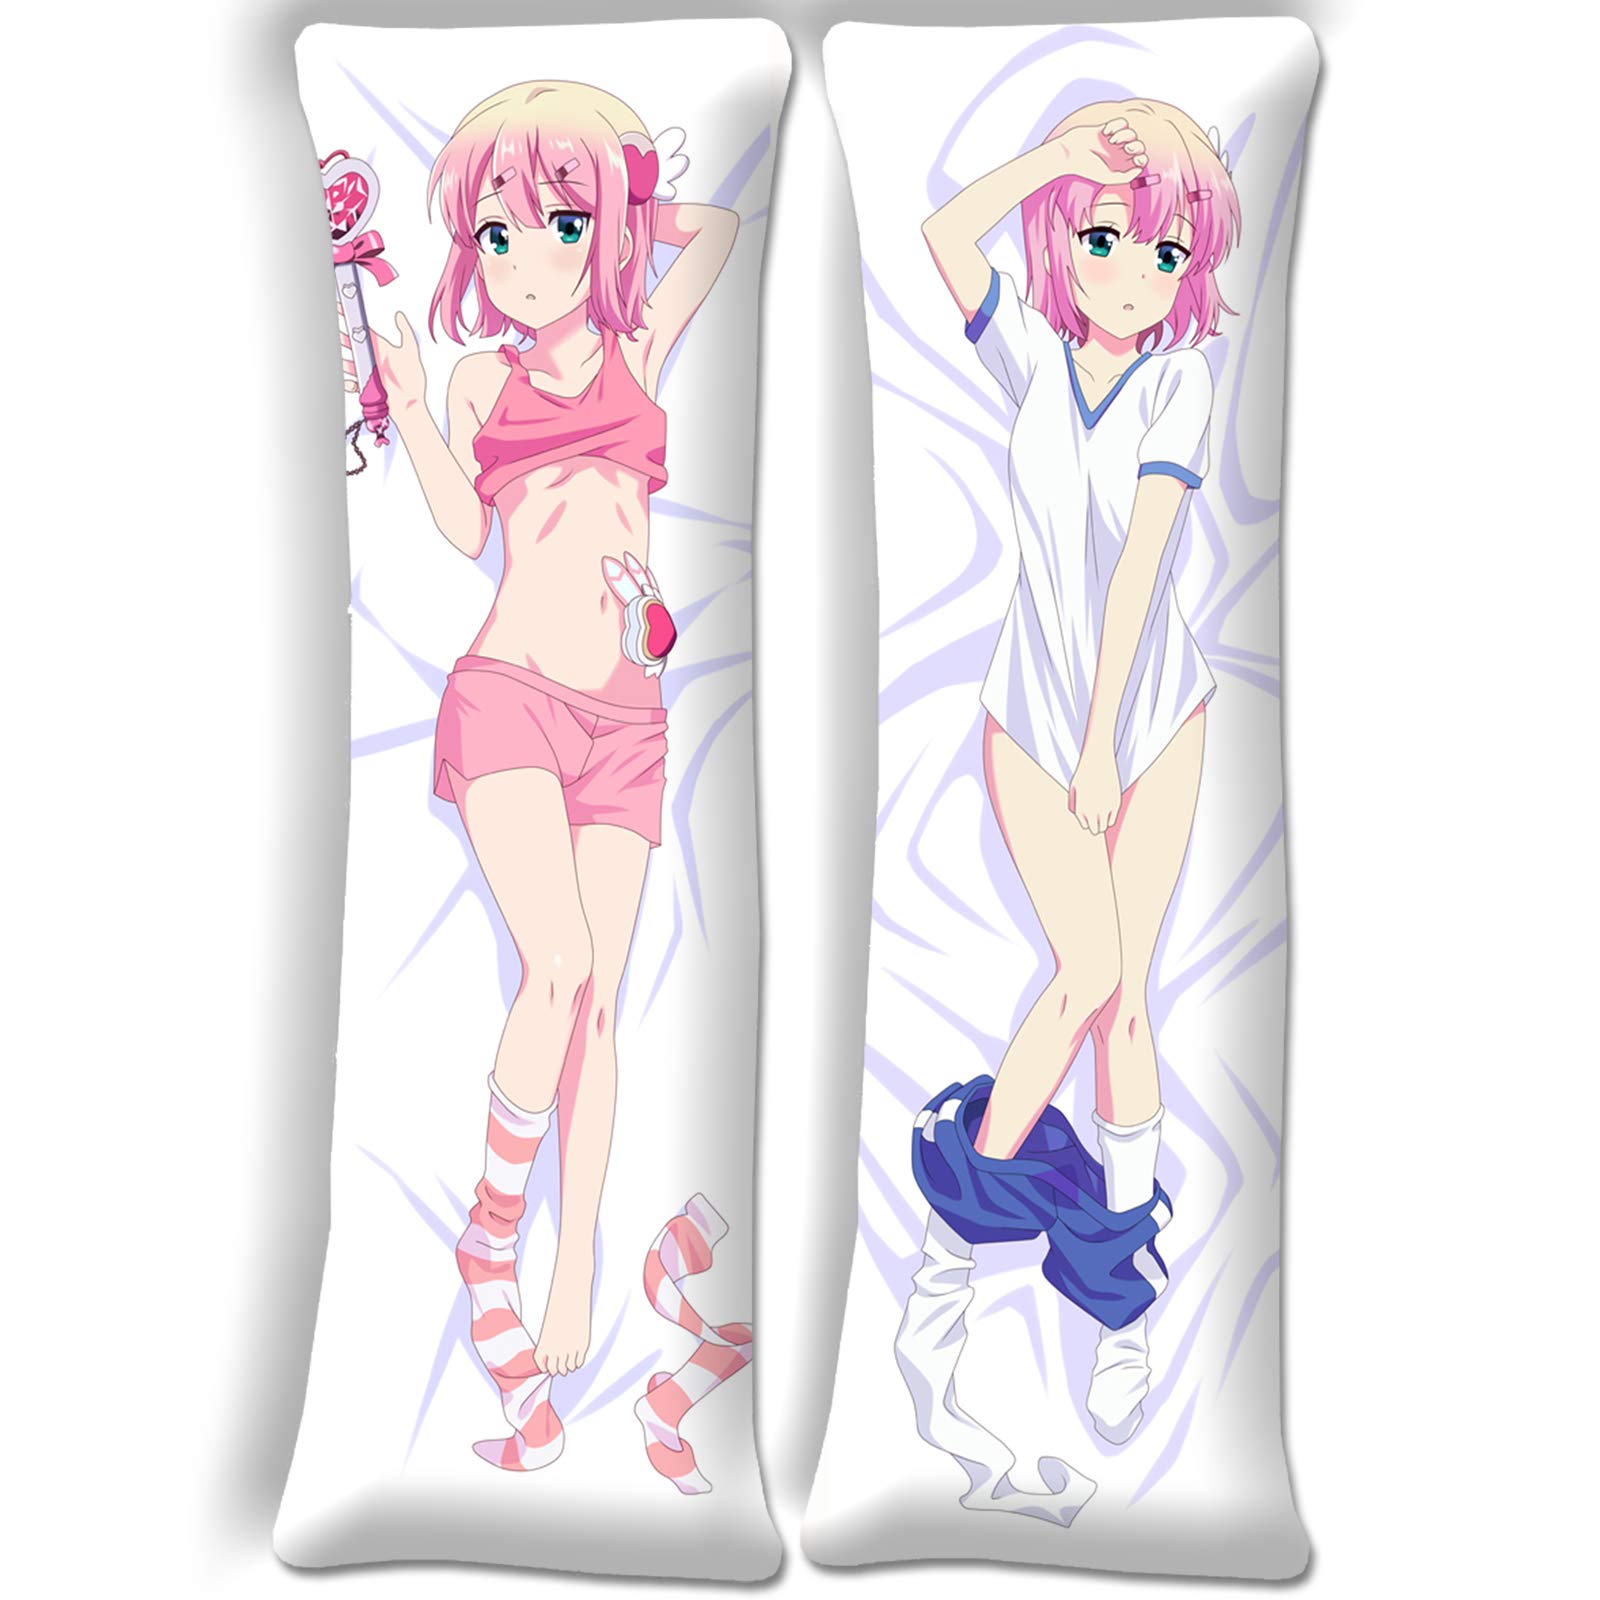 Dawery The Demon Girl Next Door Chiyoda Momo Body Pillow Covers Anime Anime Pillow Case Long Japanese Textile & Smooth Knit 120x40cm(47.2x15.7in)